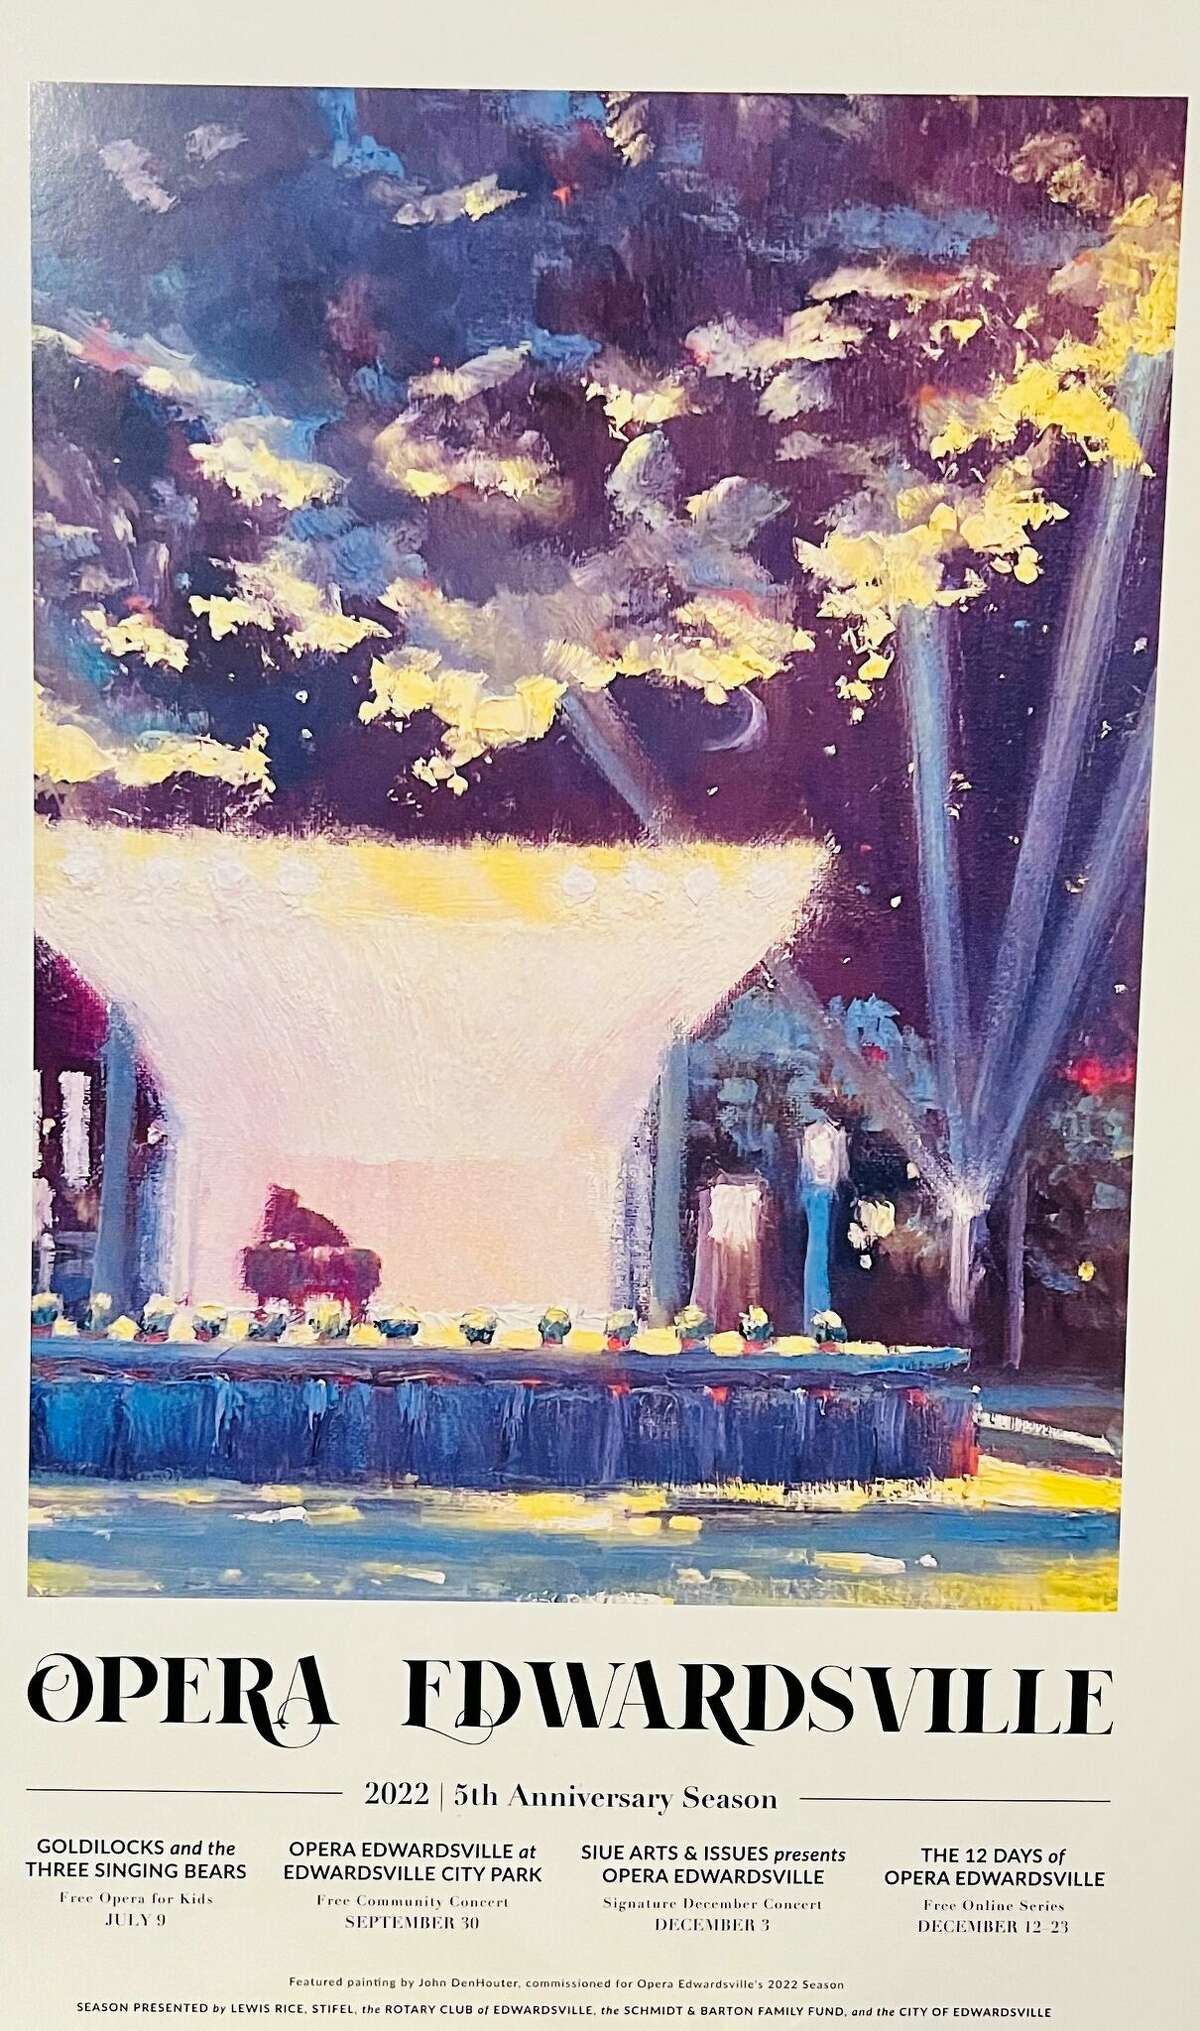 Opera Edwardsville's fifth season commemorative poster features a painting by John DenHouter. OE is planning a free concert at 7:30 p.m. on Friday, Sept. 30 at Edwardsville City Park.